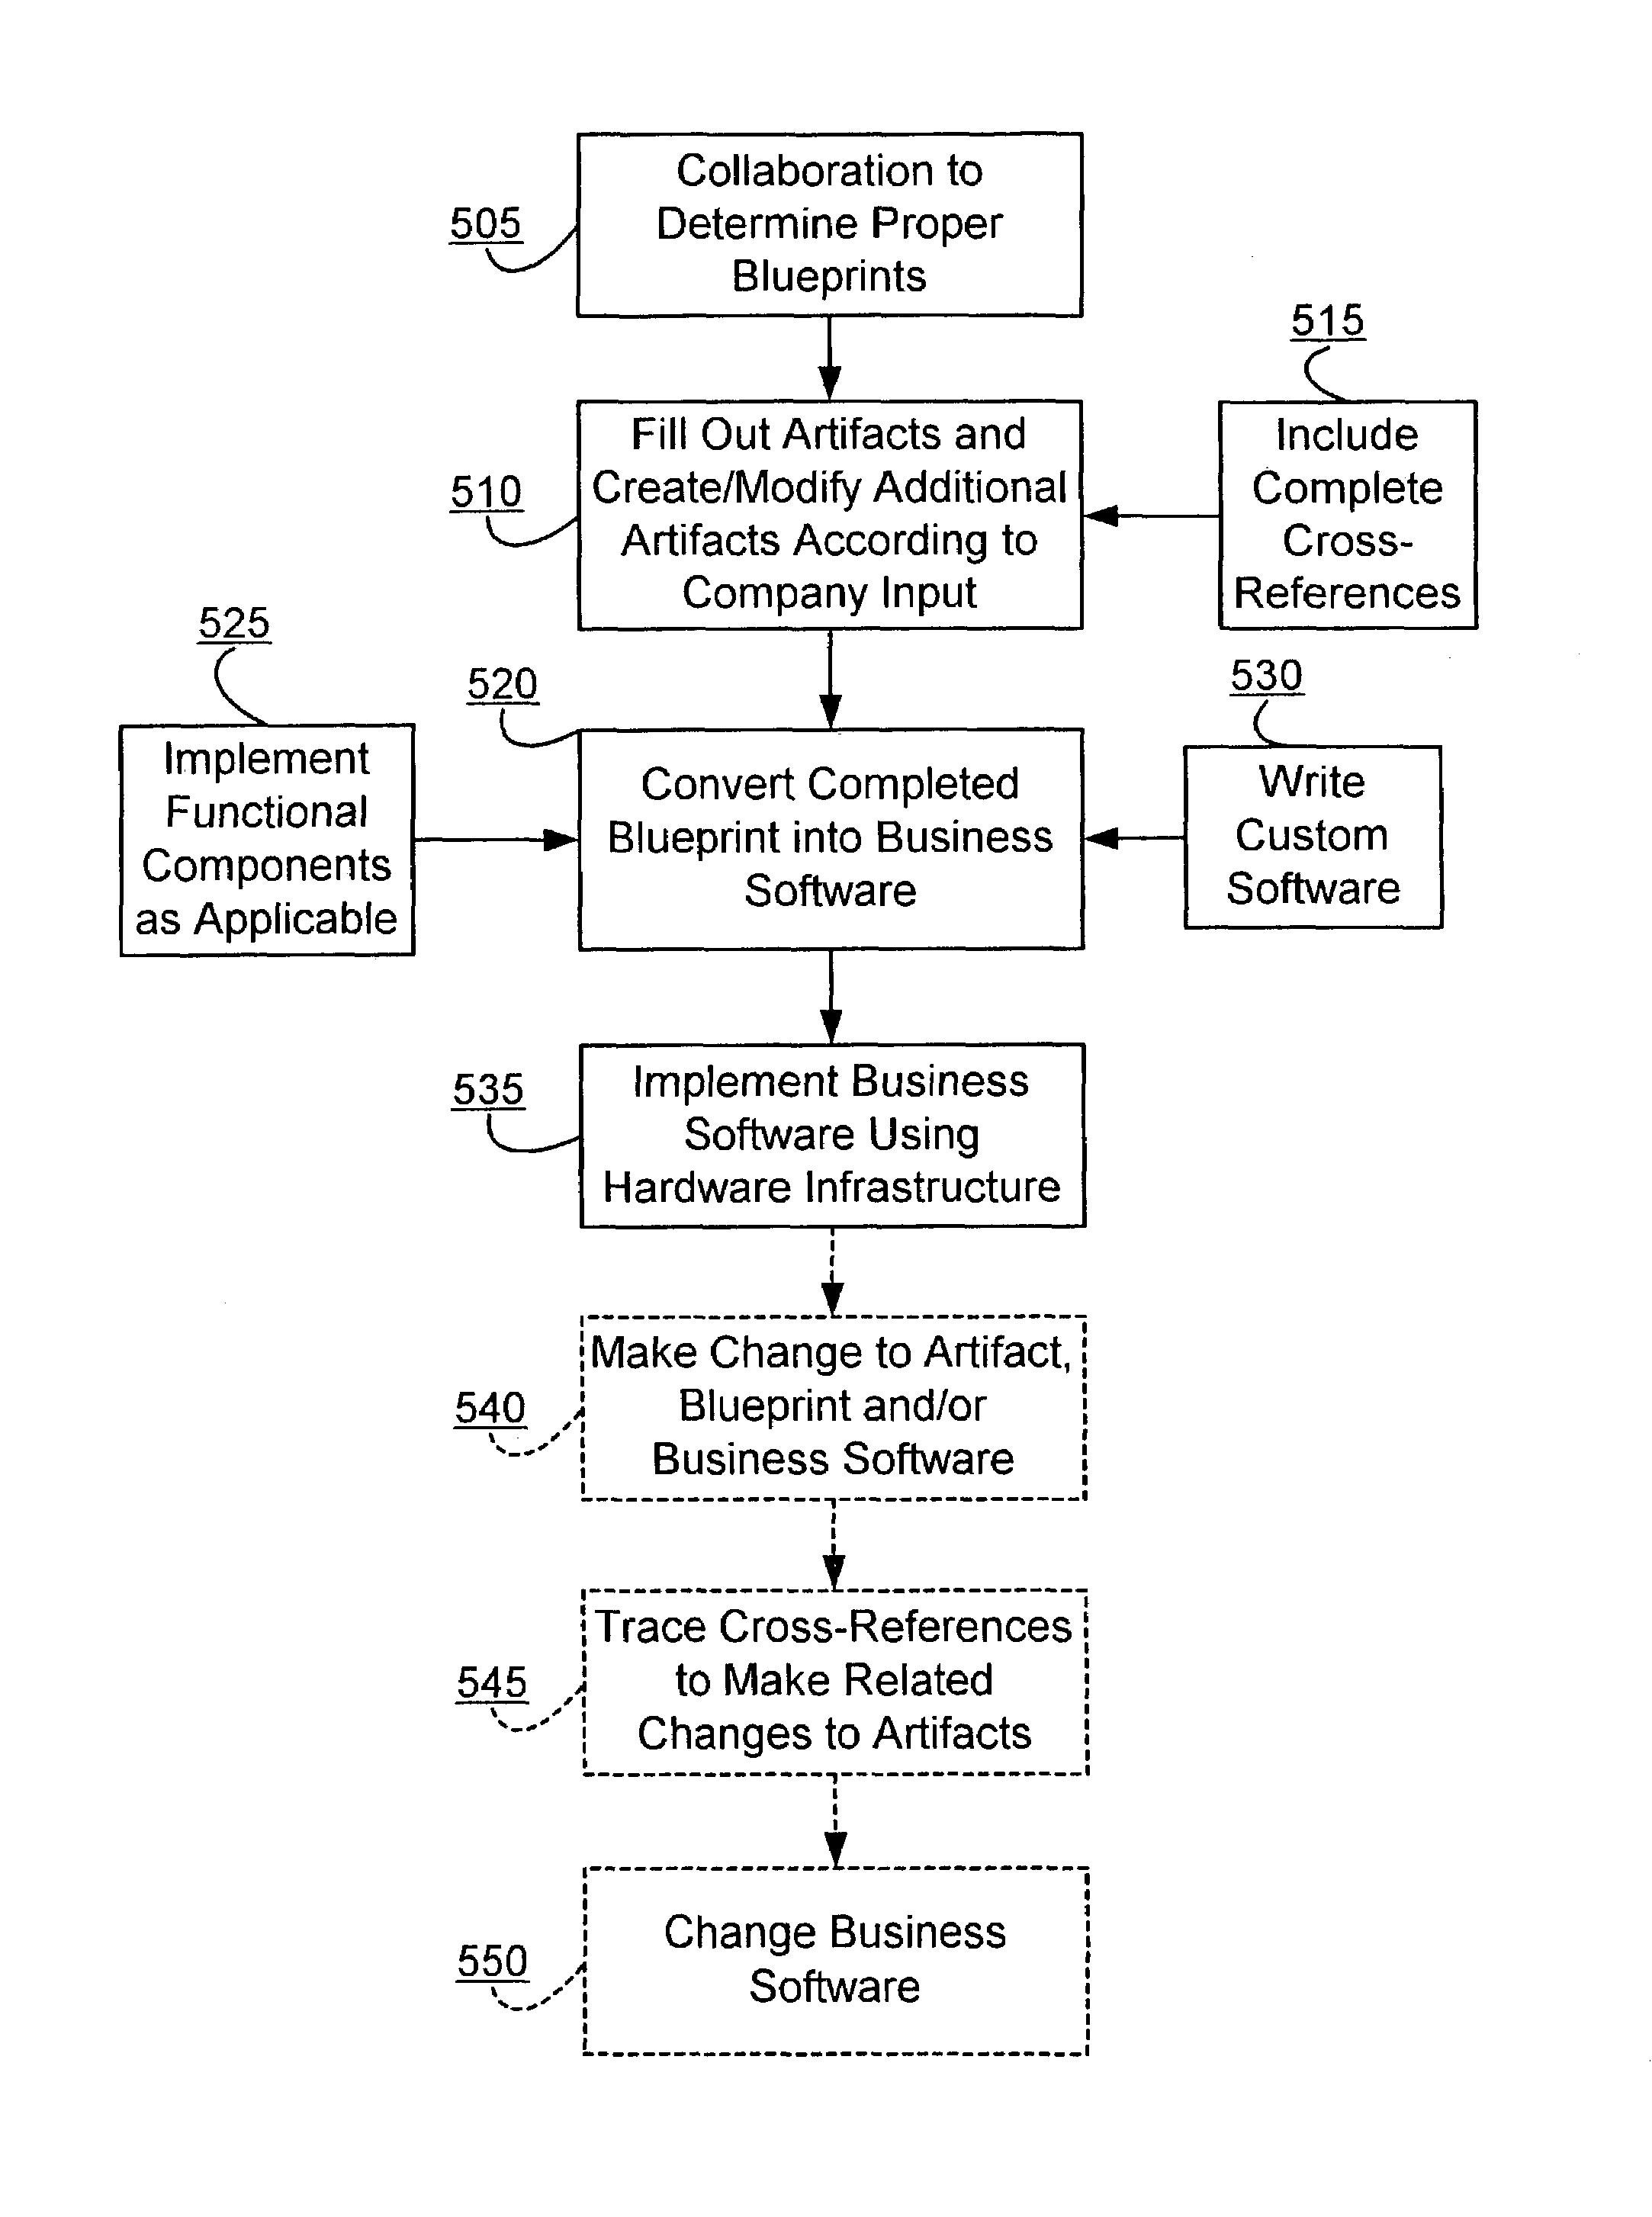 System and method for using blueprints to provide a software solution for an enterprise